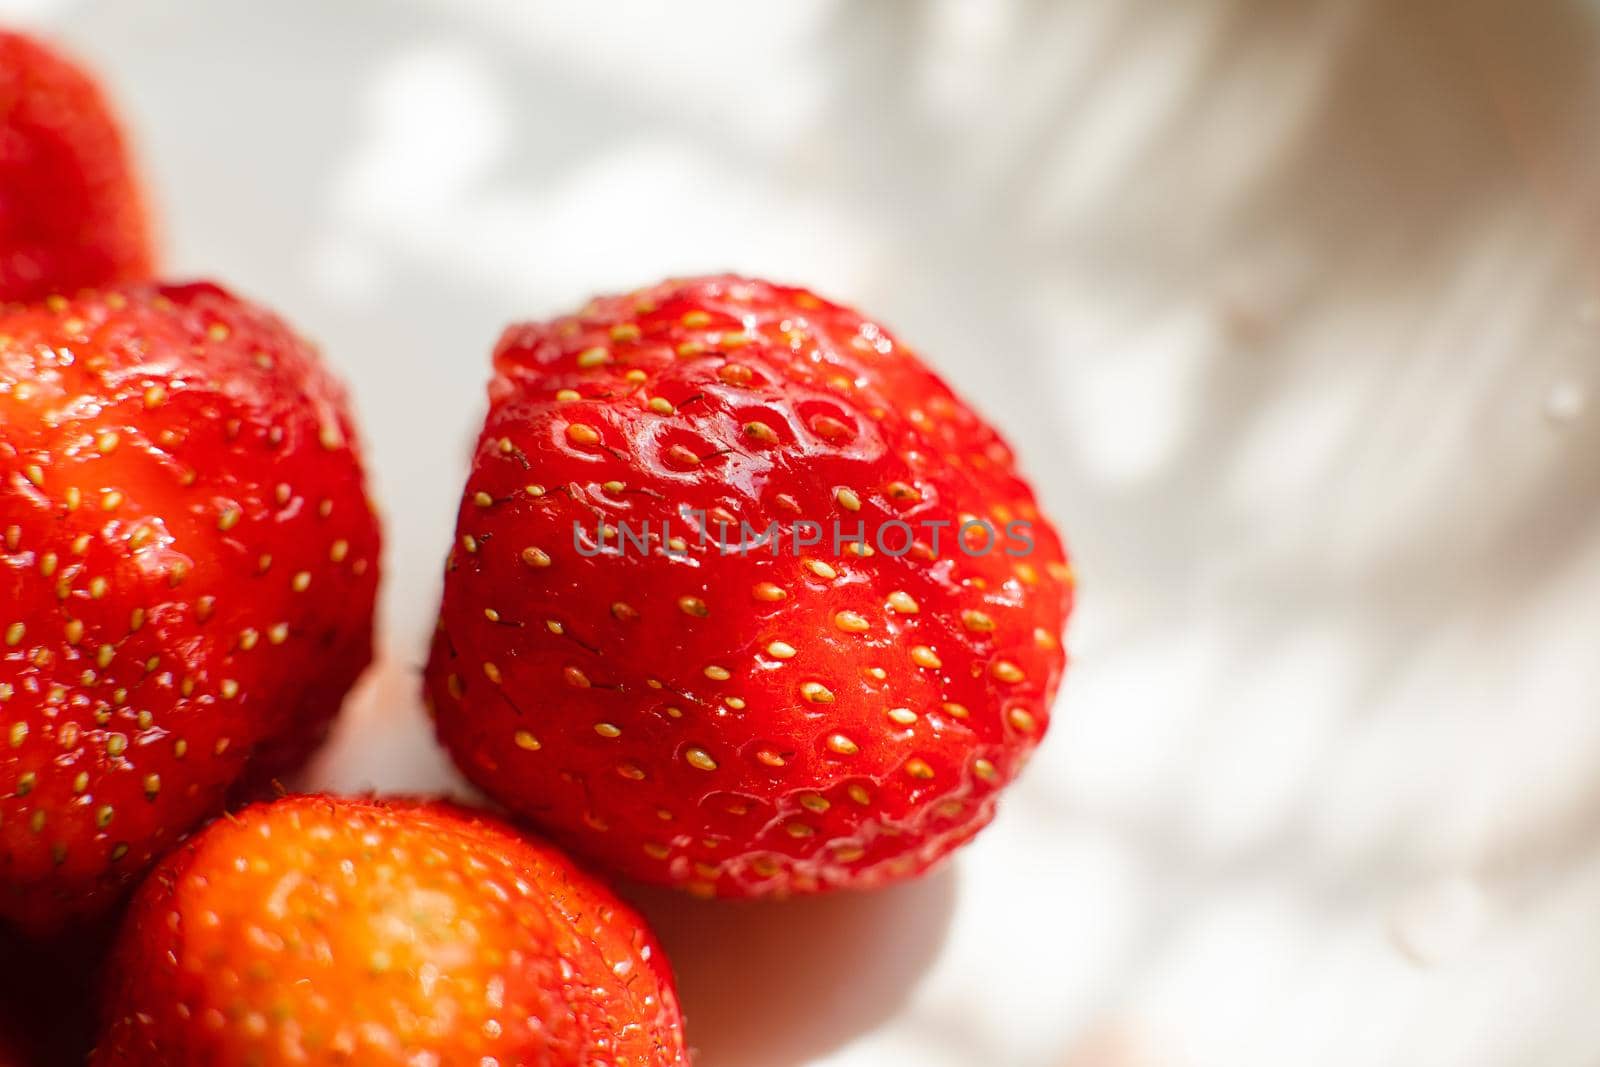 Macro stock photo of large organic sweet strawberries in sunlight. Strawberry texture in close-up. Seeds and dirt.